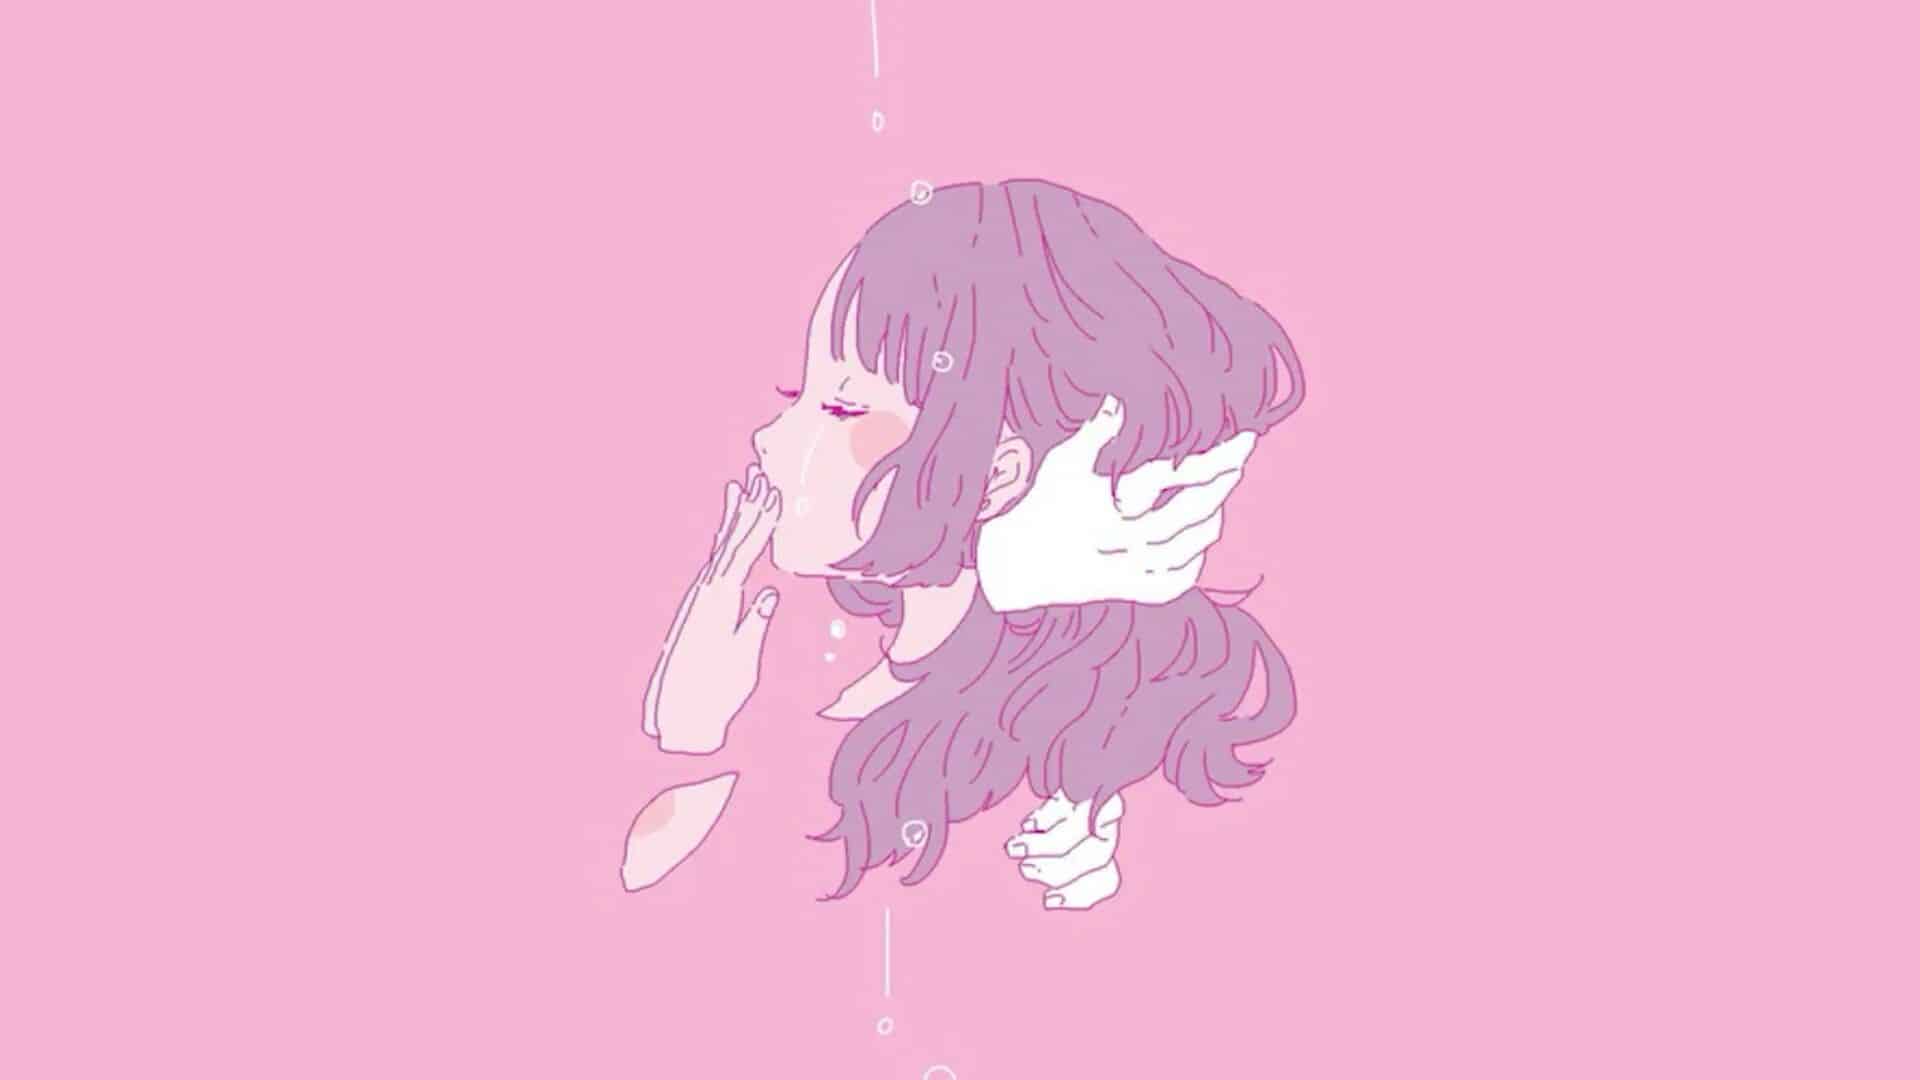 Illustration of a girl crying on a pink background - Lo fi, 90s